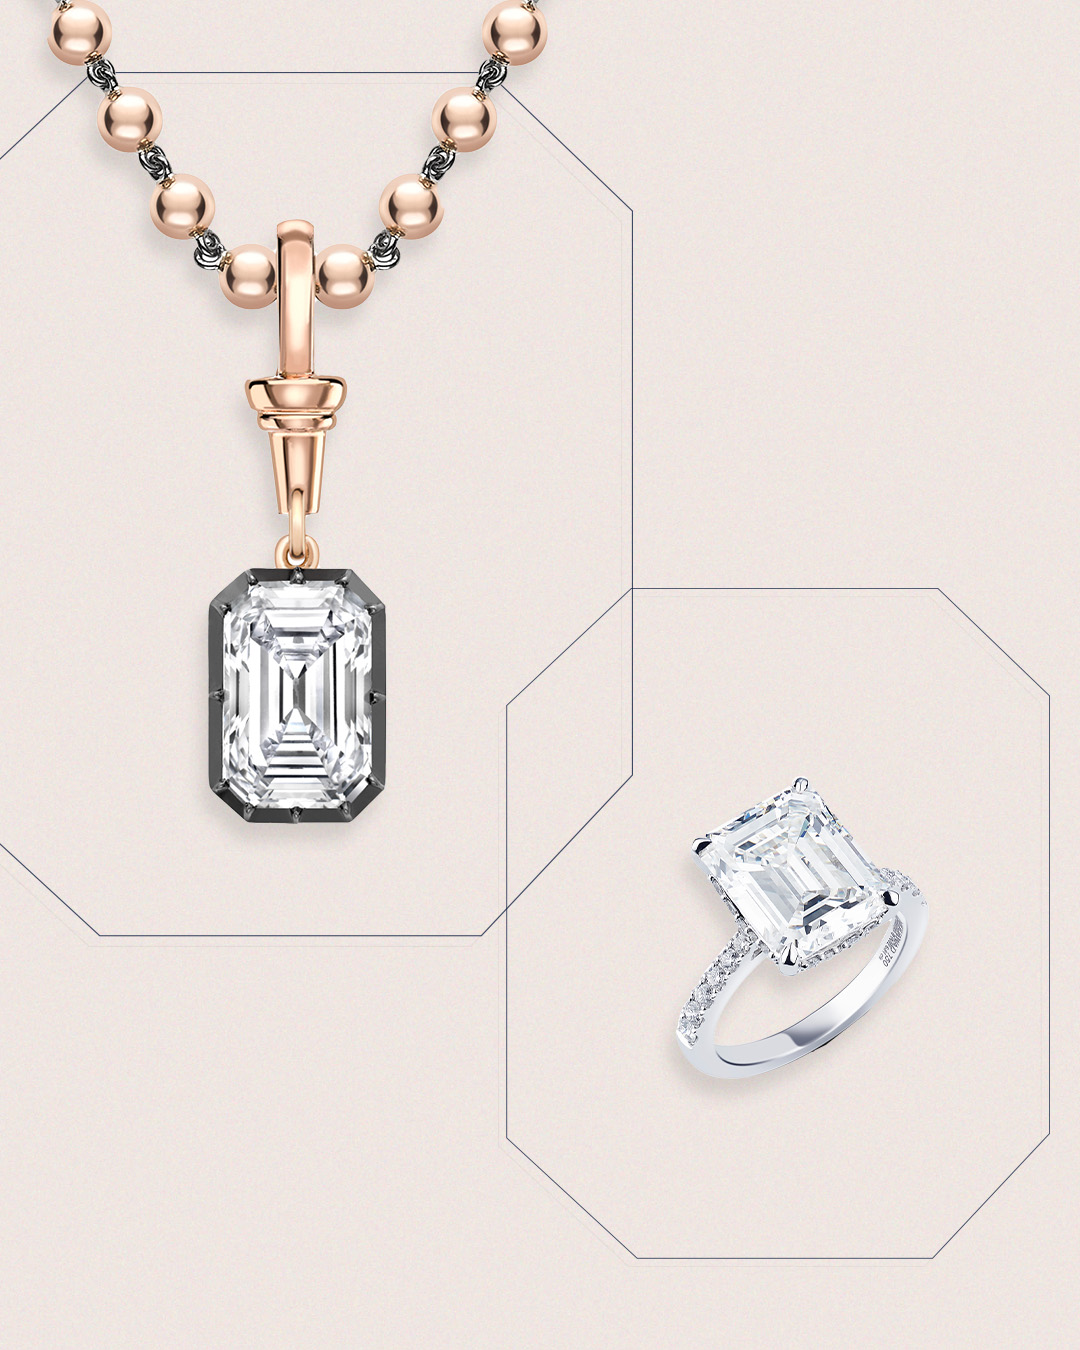 Emerald-Cut Diamond necklace and ring